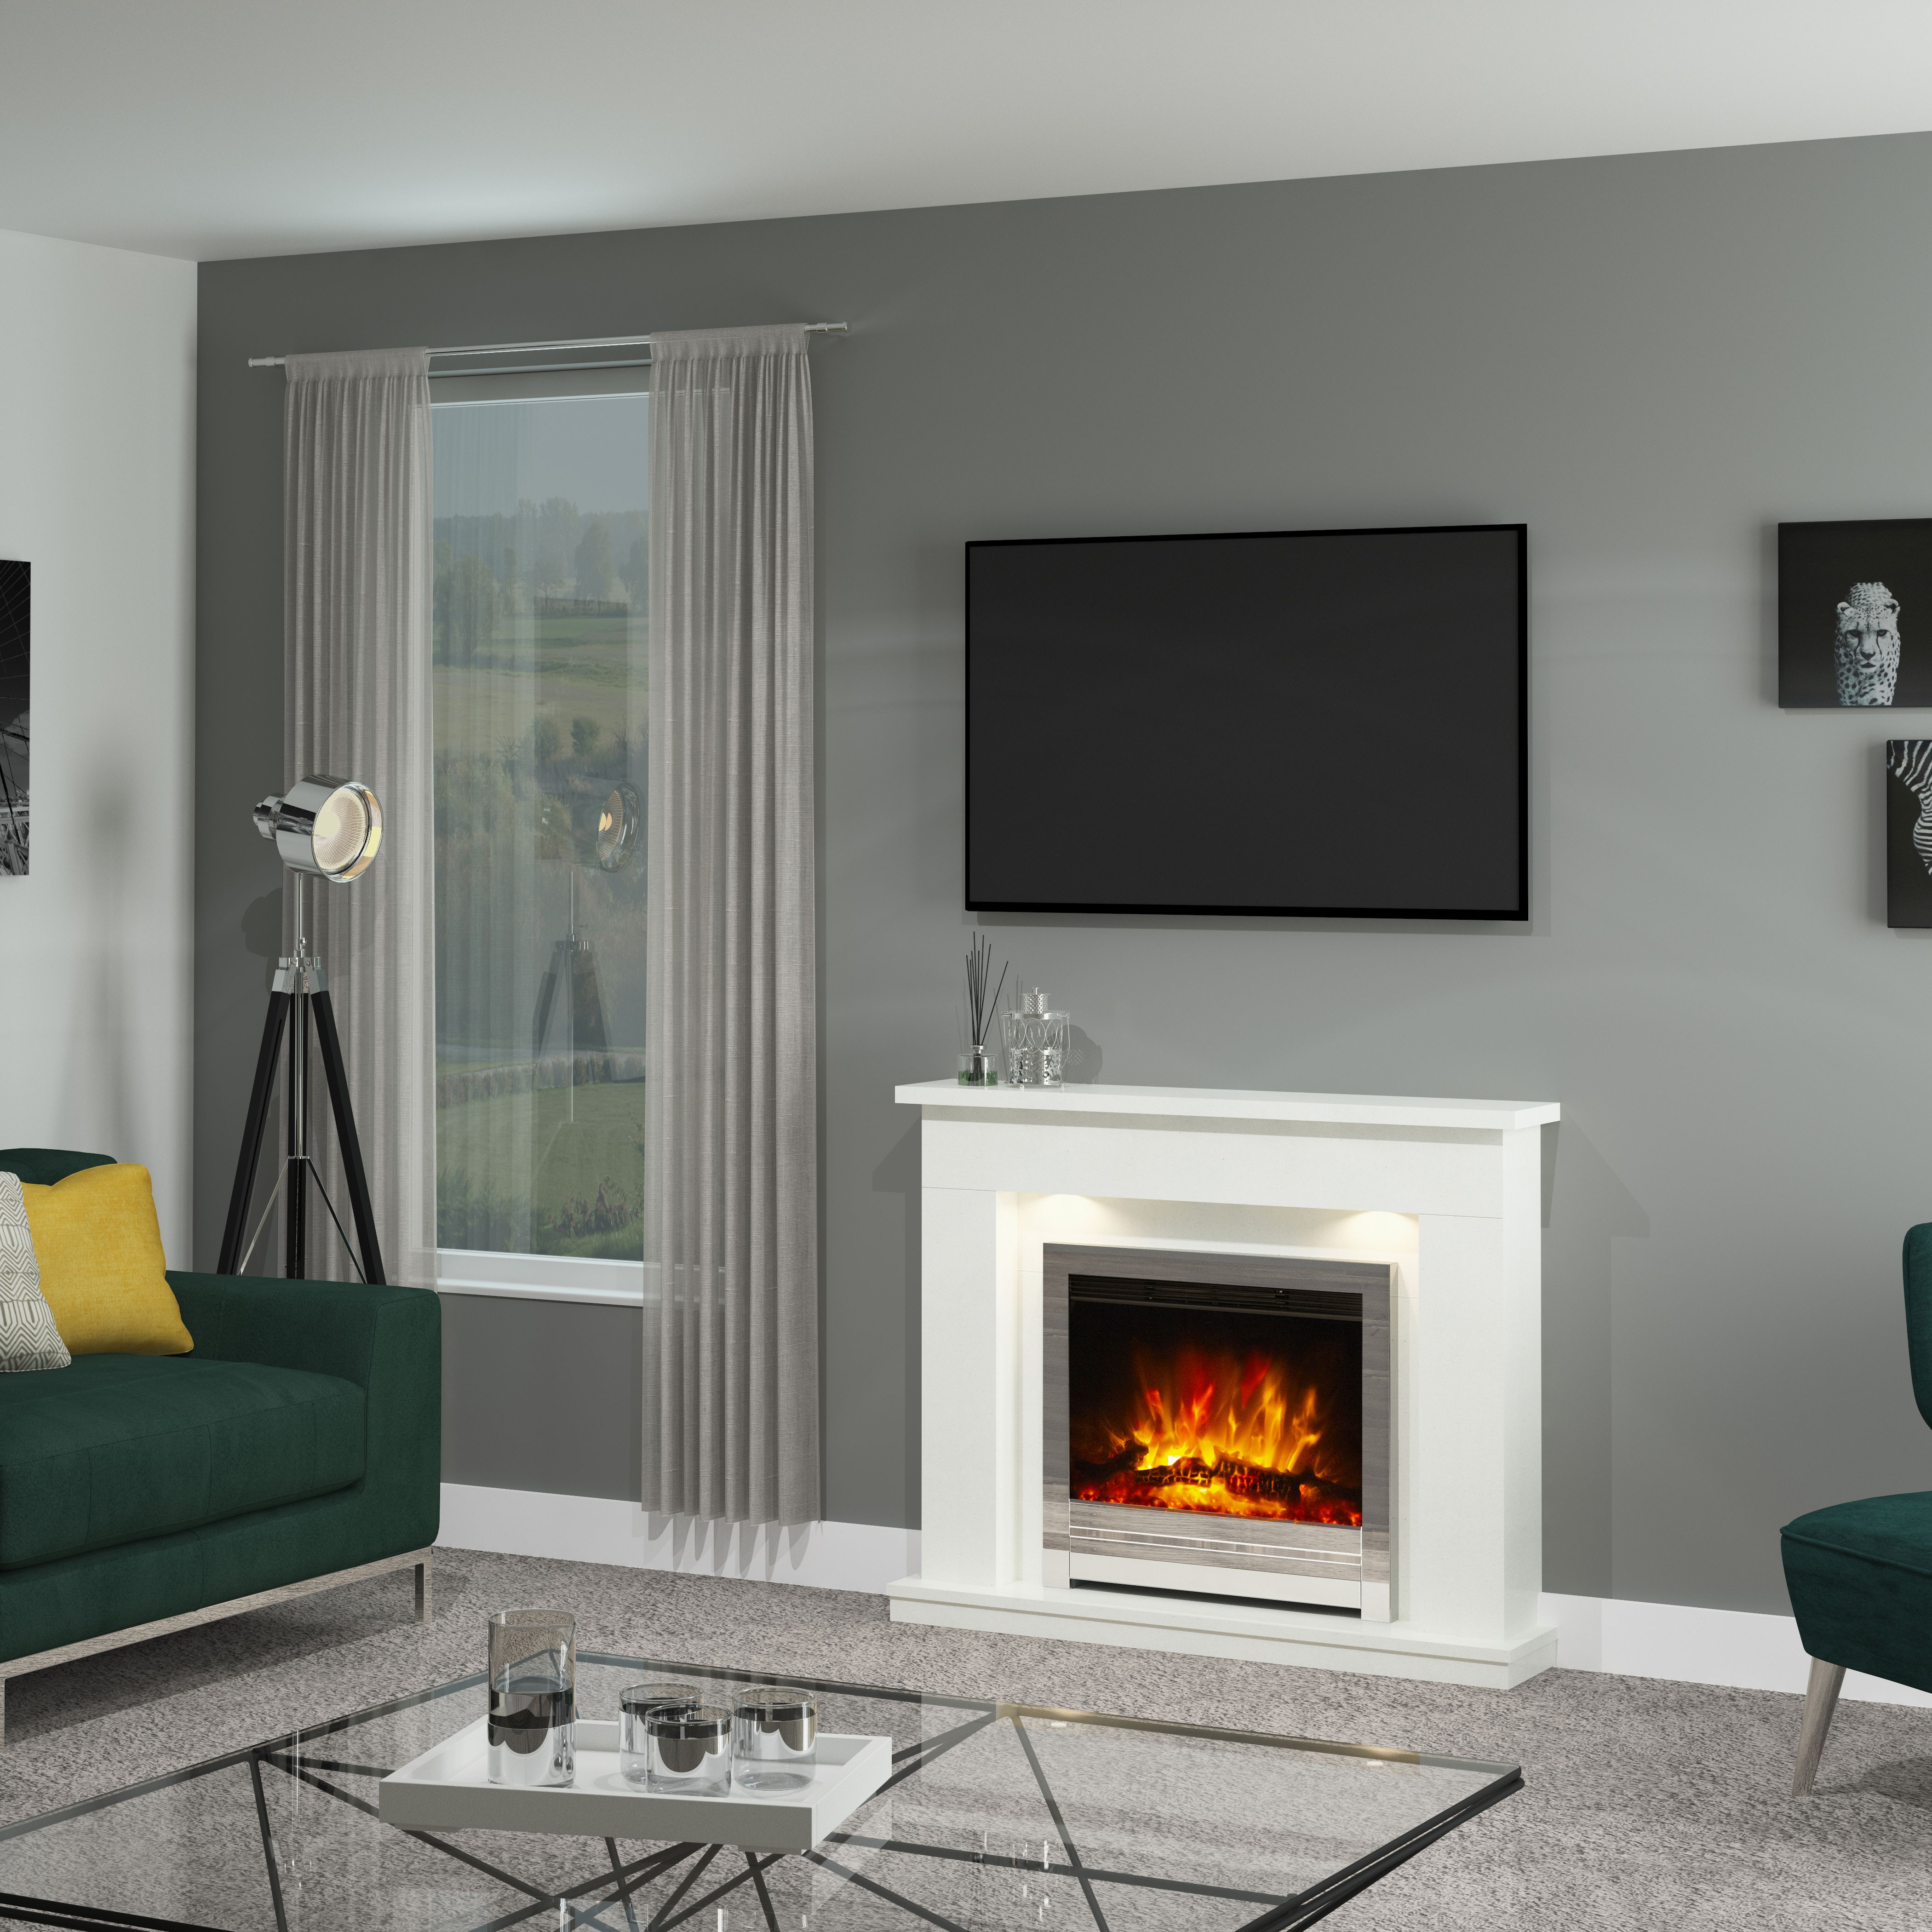 Be Modern Ellenslea White marble Inset Electric Fire suite